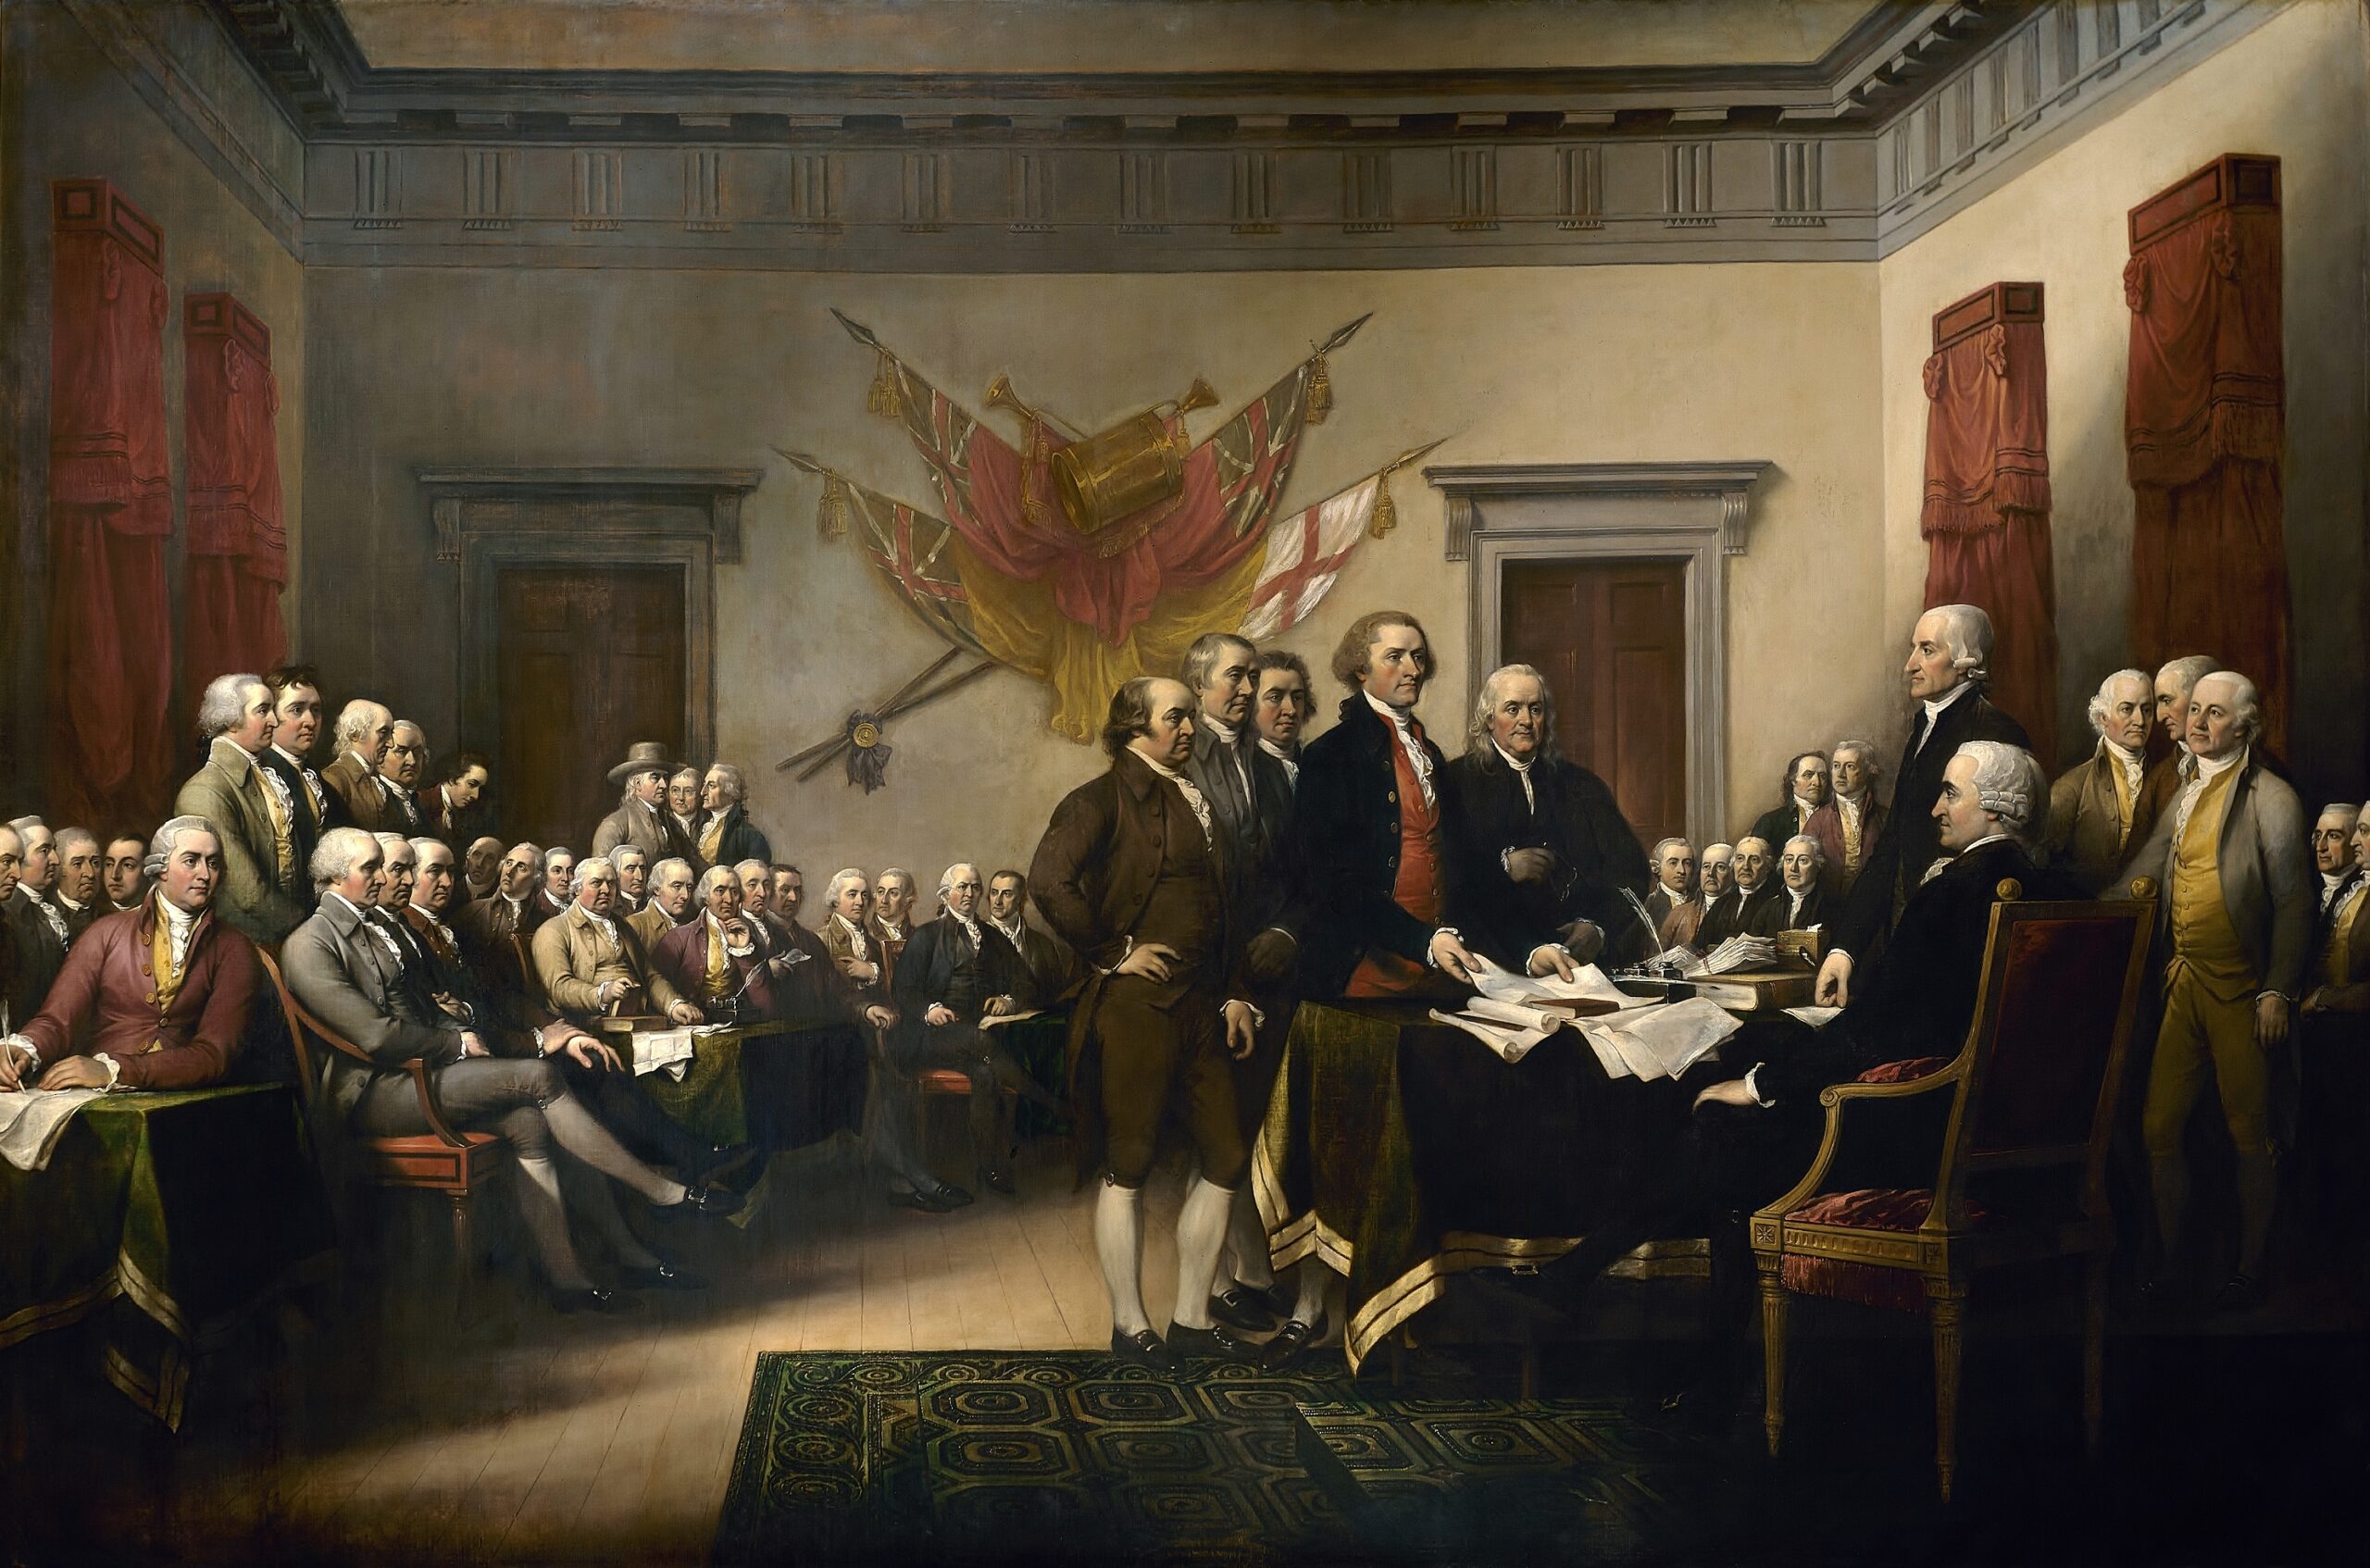 Painting of the founding fathers with the declaration of independence